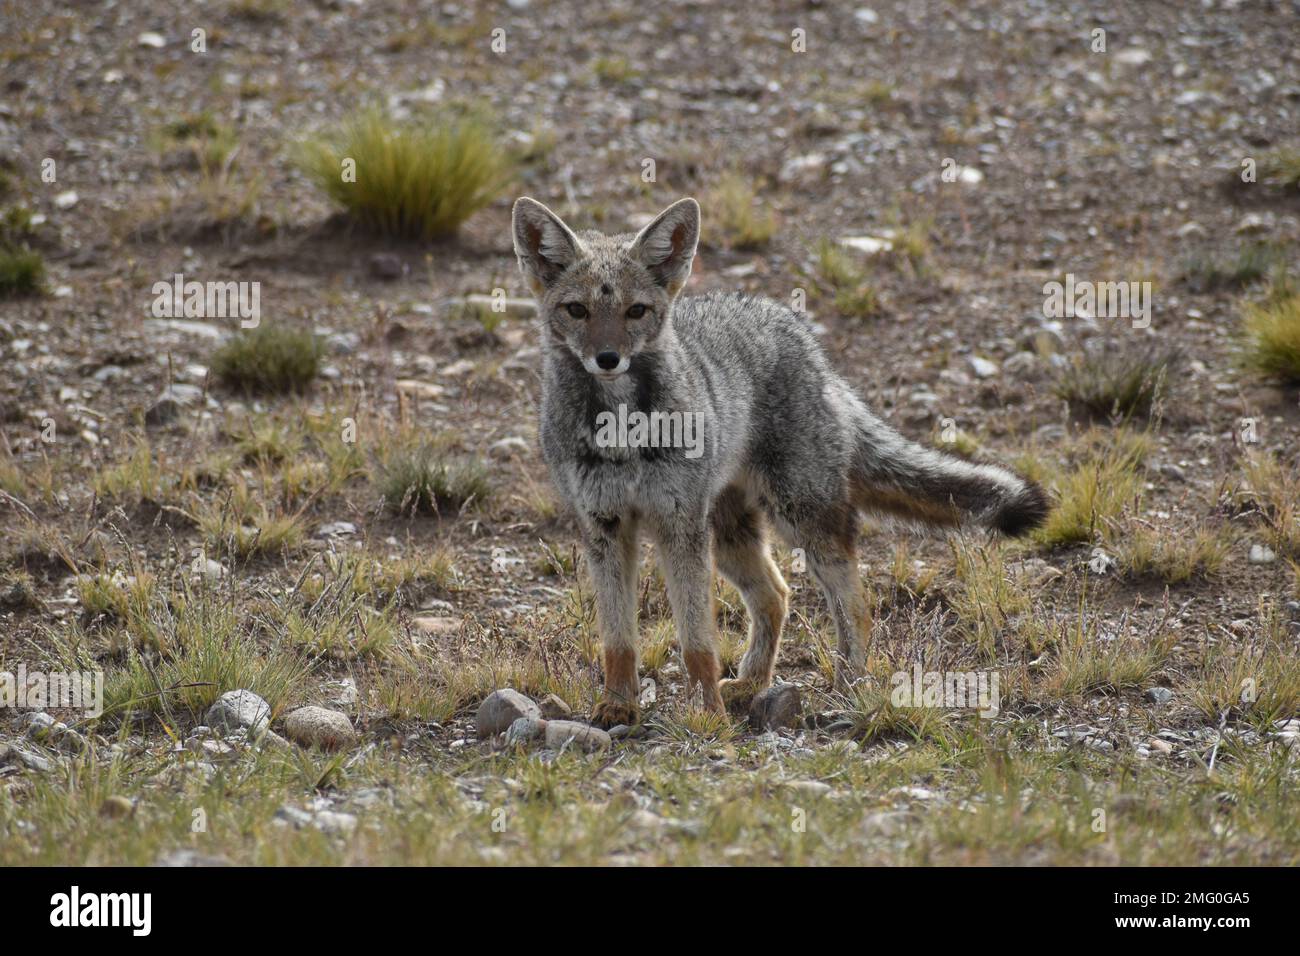 South American gray fox (Lycalopex griseus), also known as the Patagonian fox, the chilla or the gray zorro Stock Photo